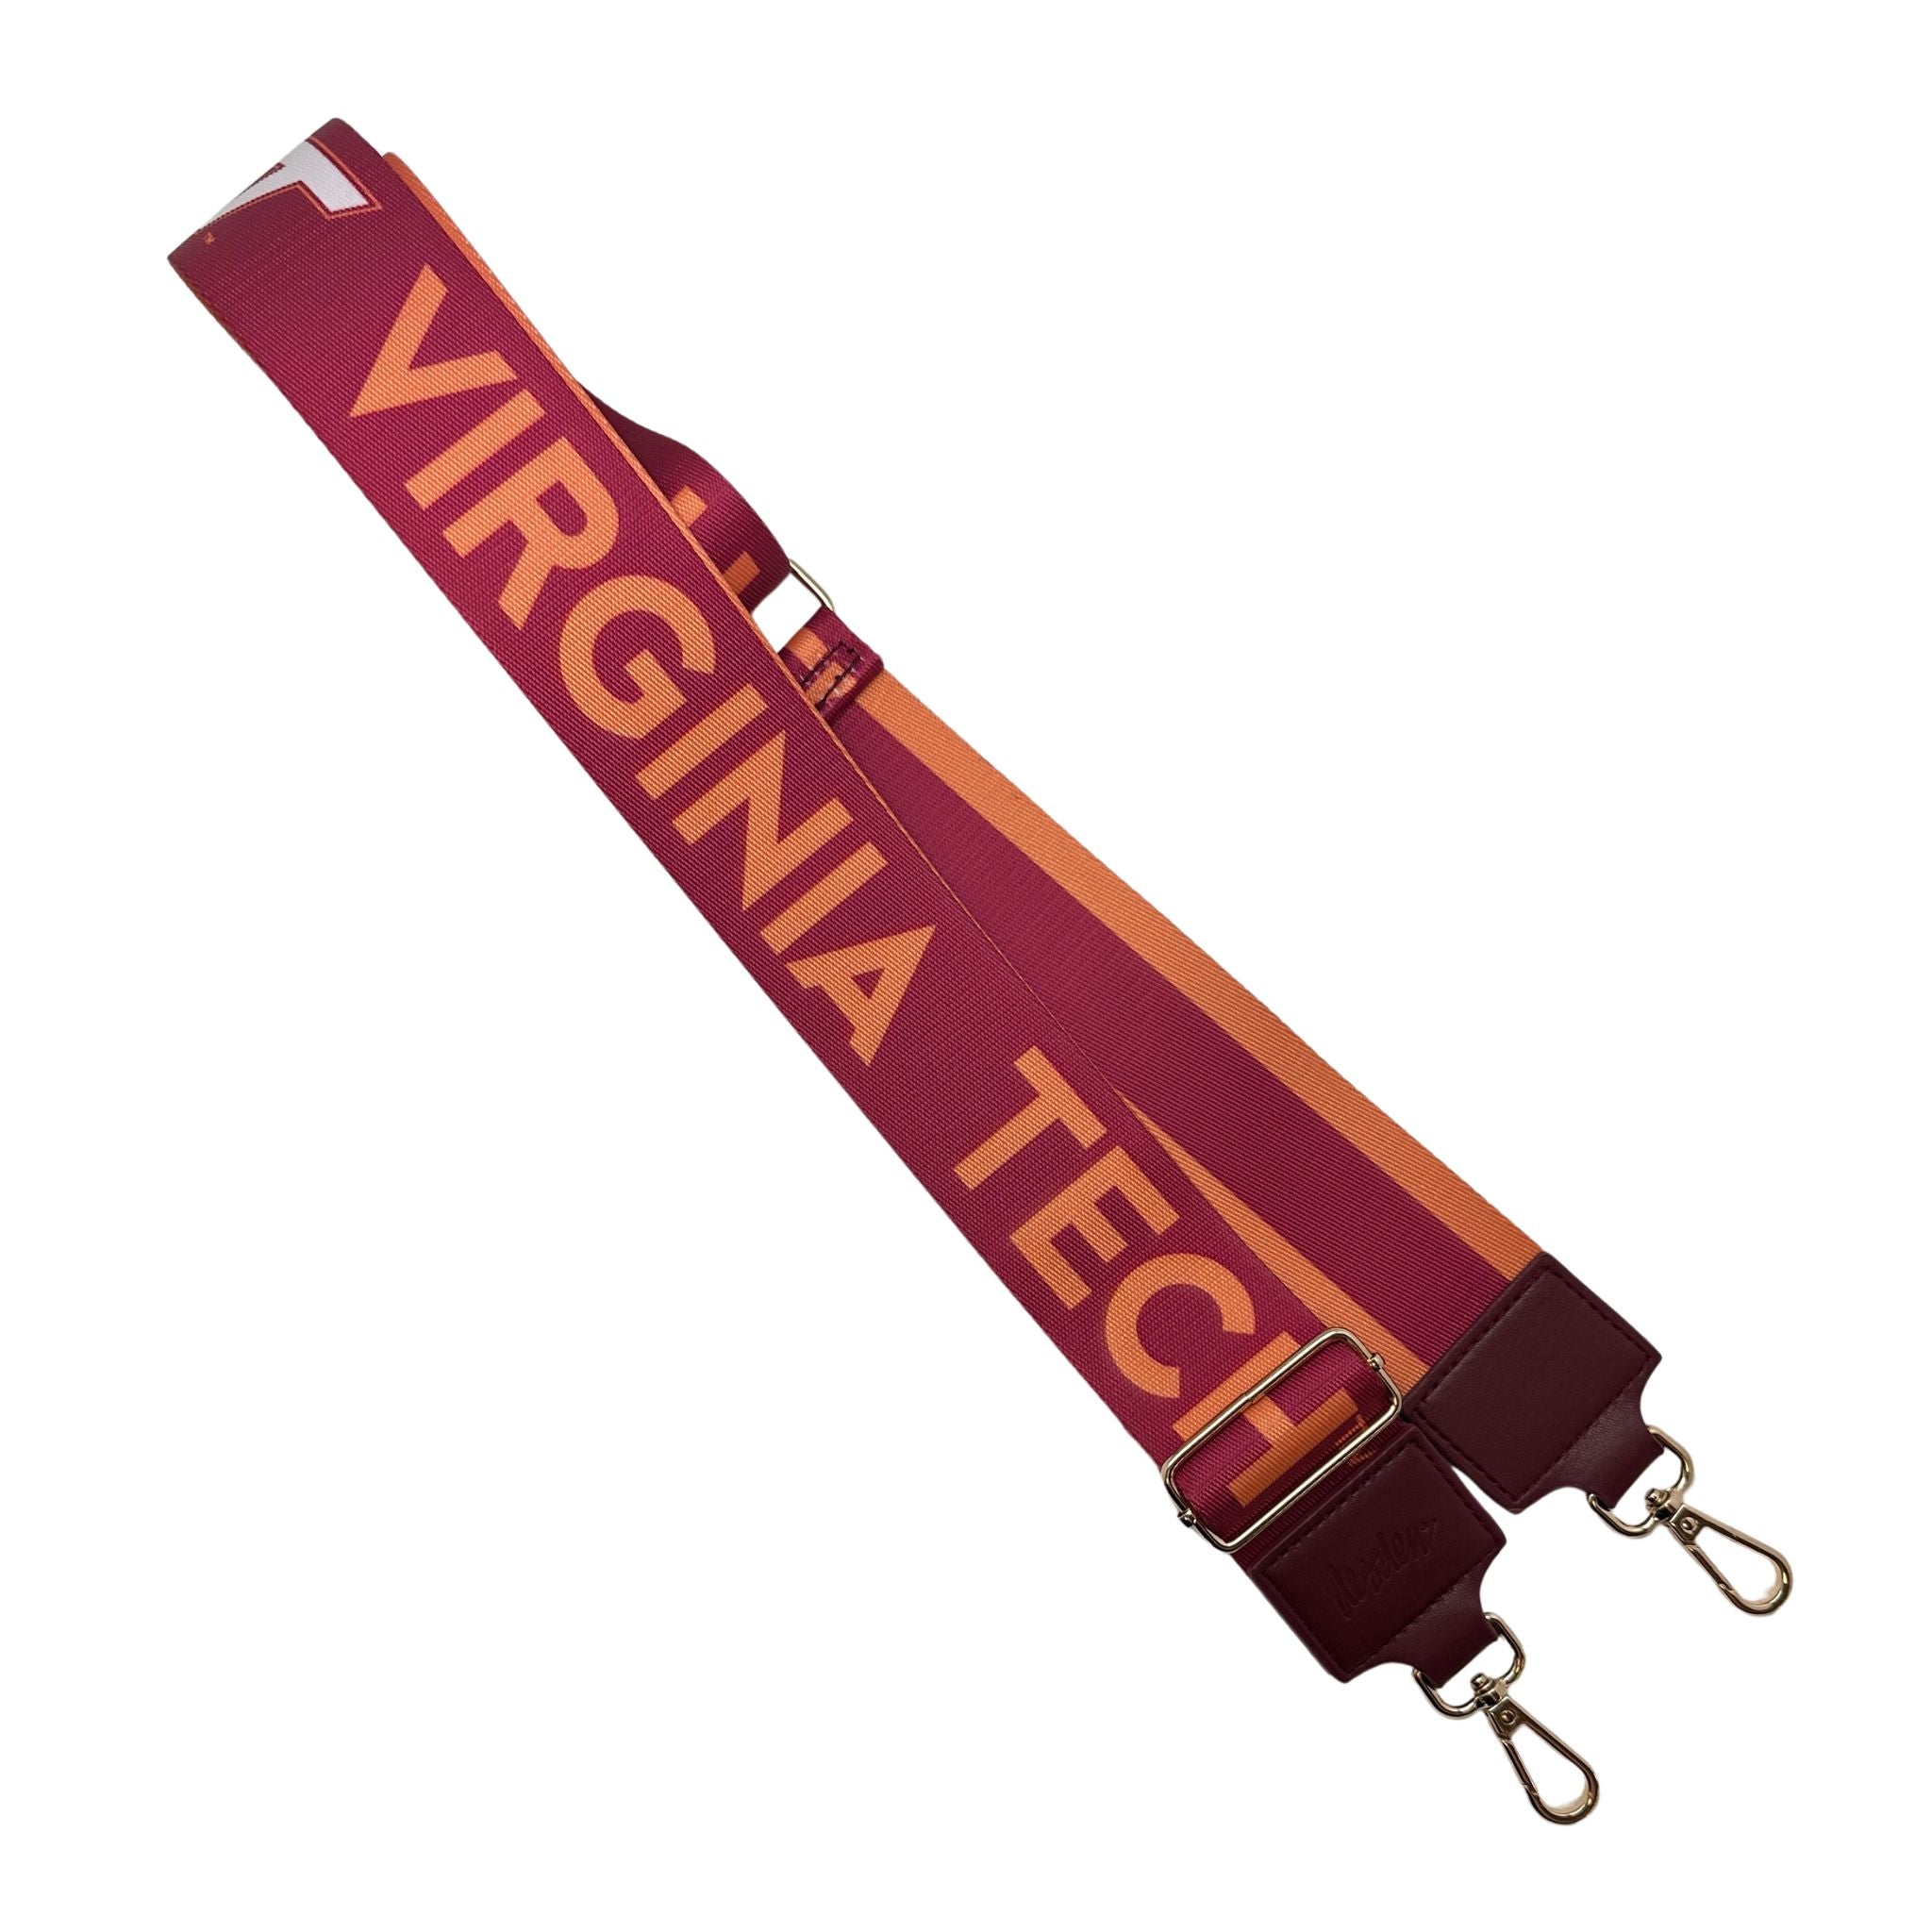 VIRGINIA TECH 2" - Officially Licensed - Stripe